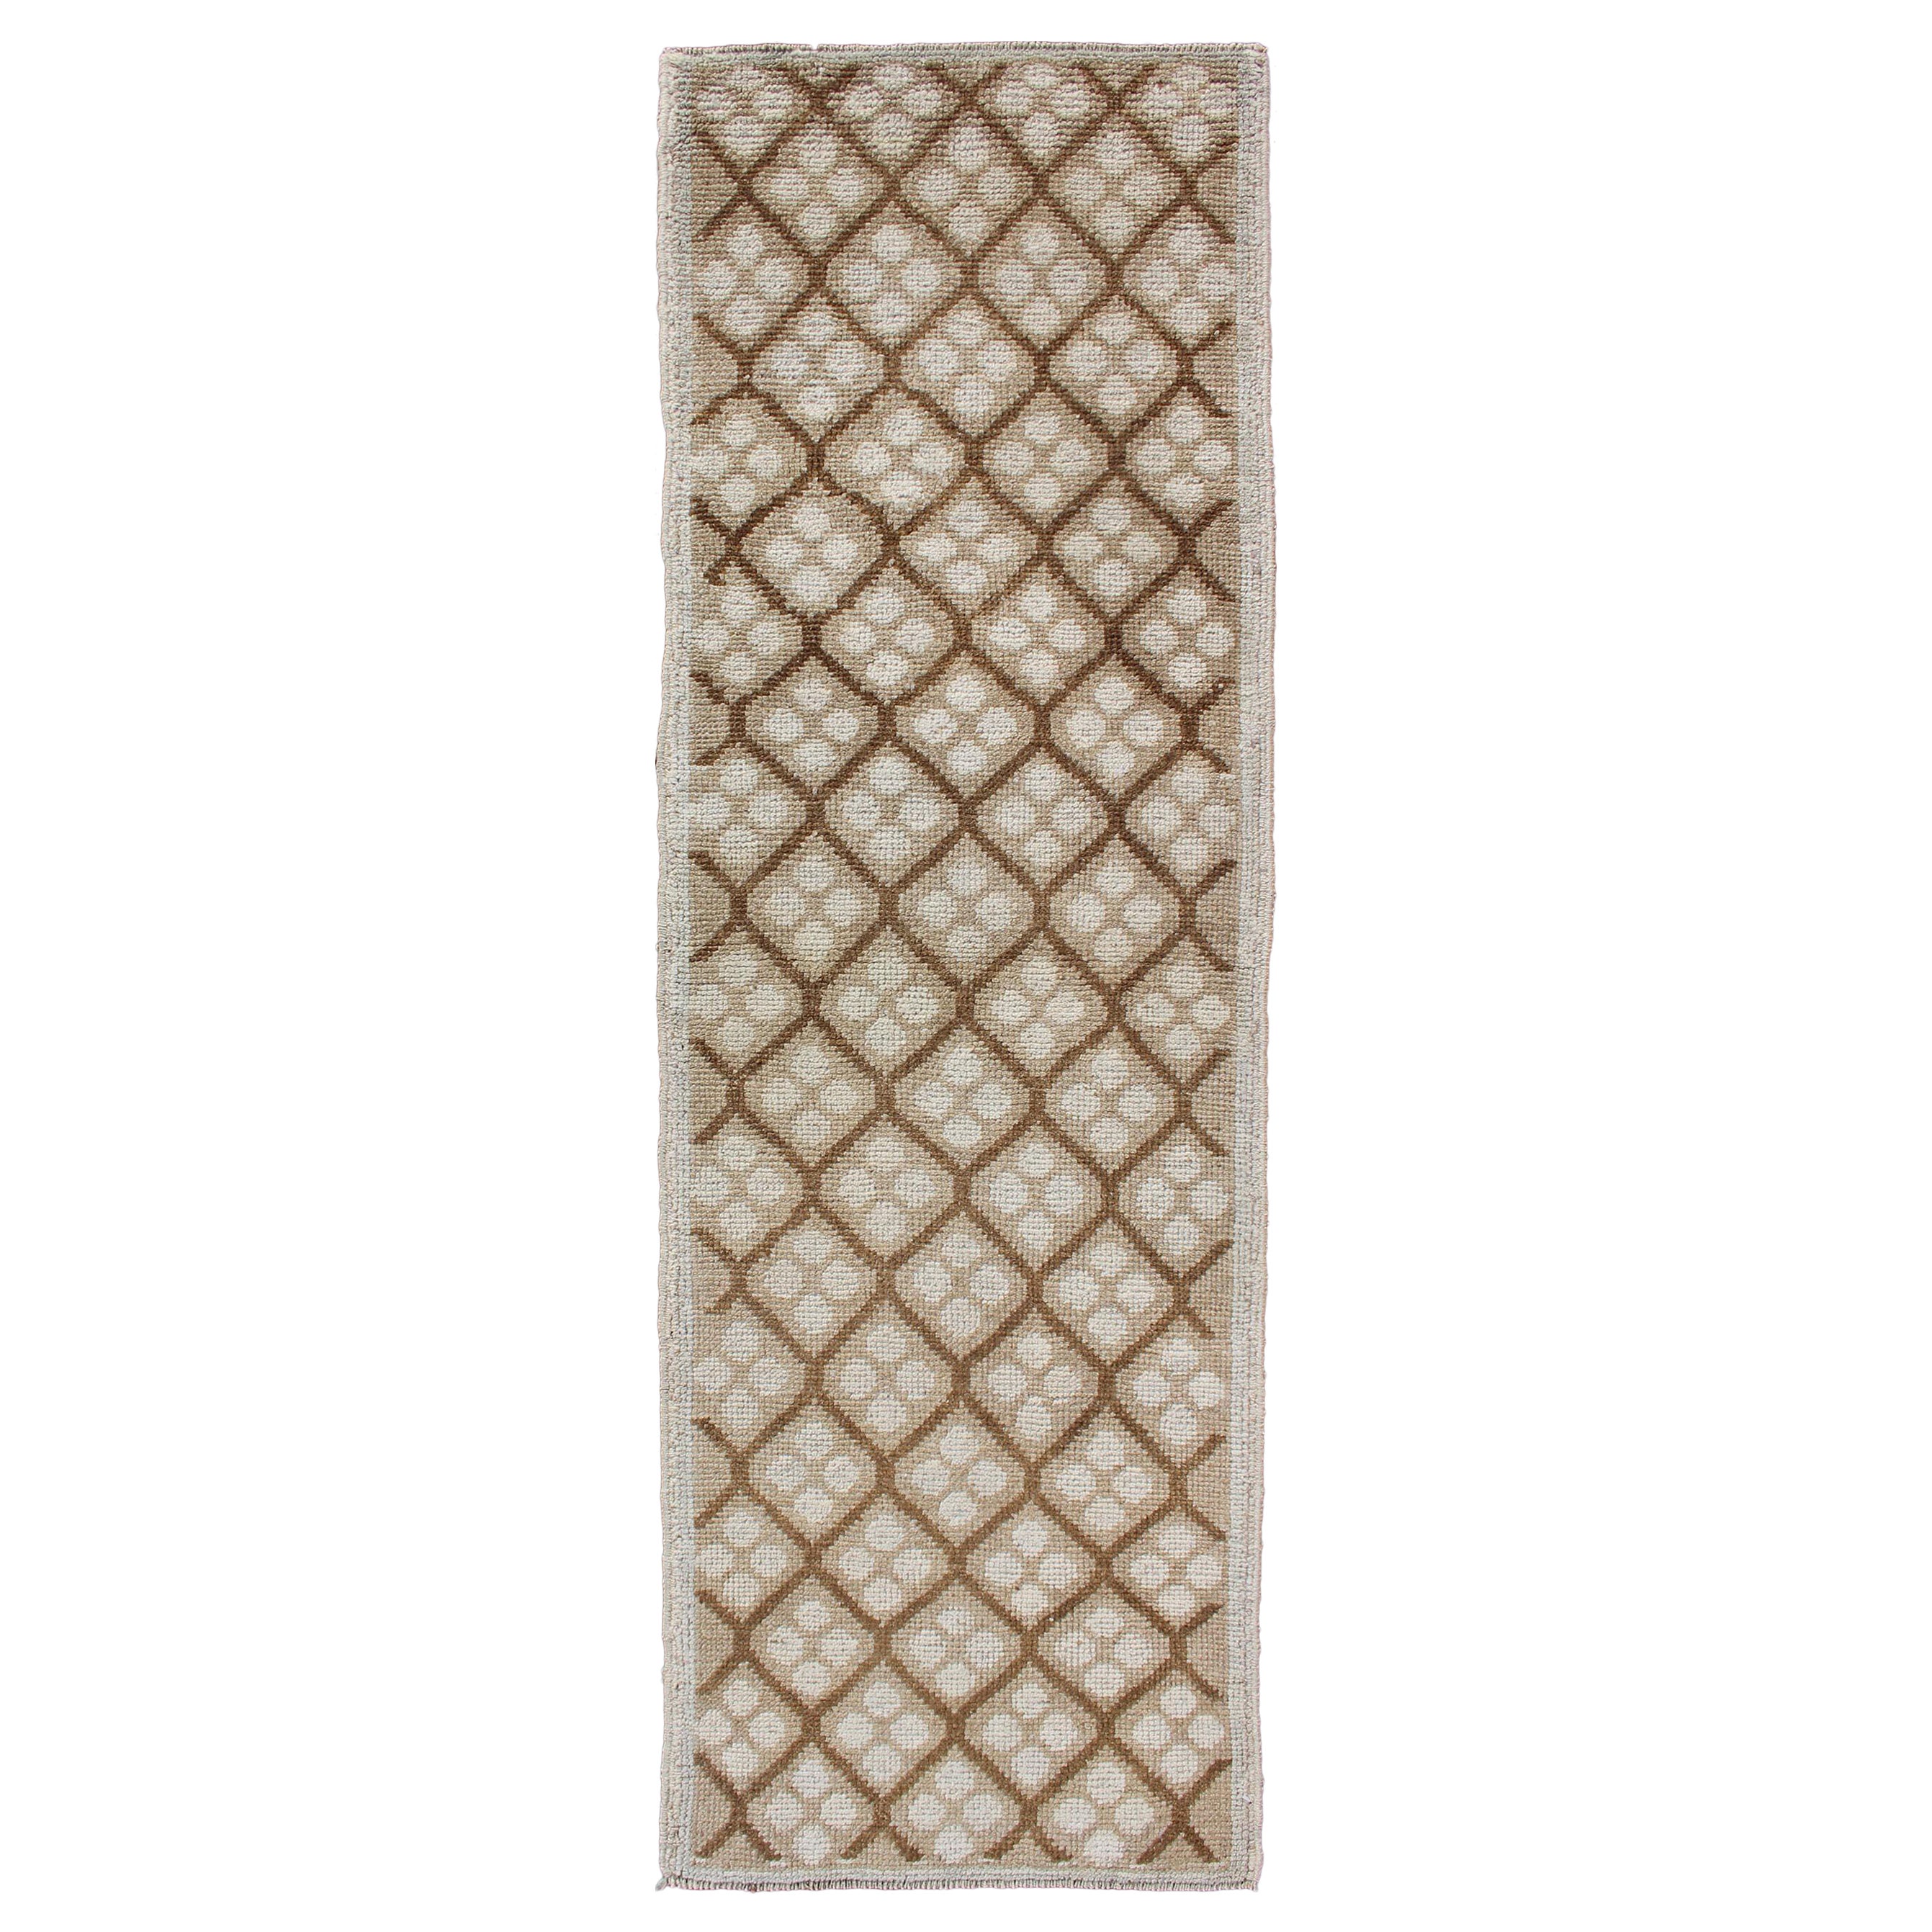 Tribal Vintage Hand Knotted Oushak Runner with All-Over Diamond Design